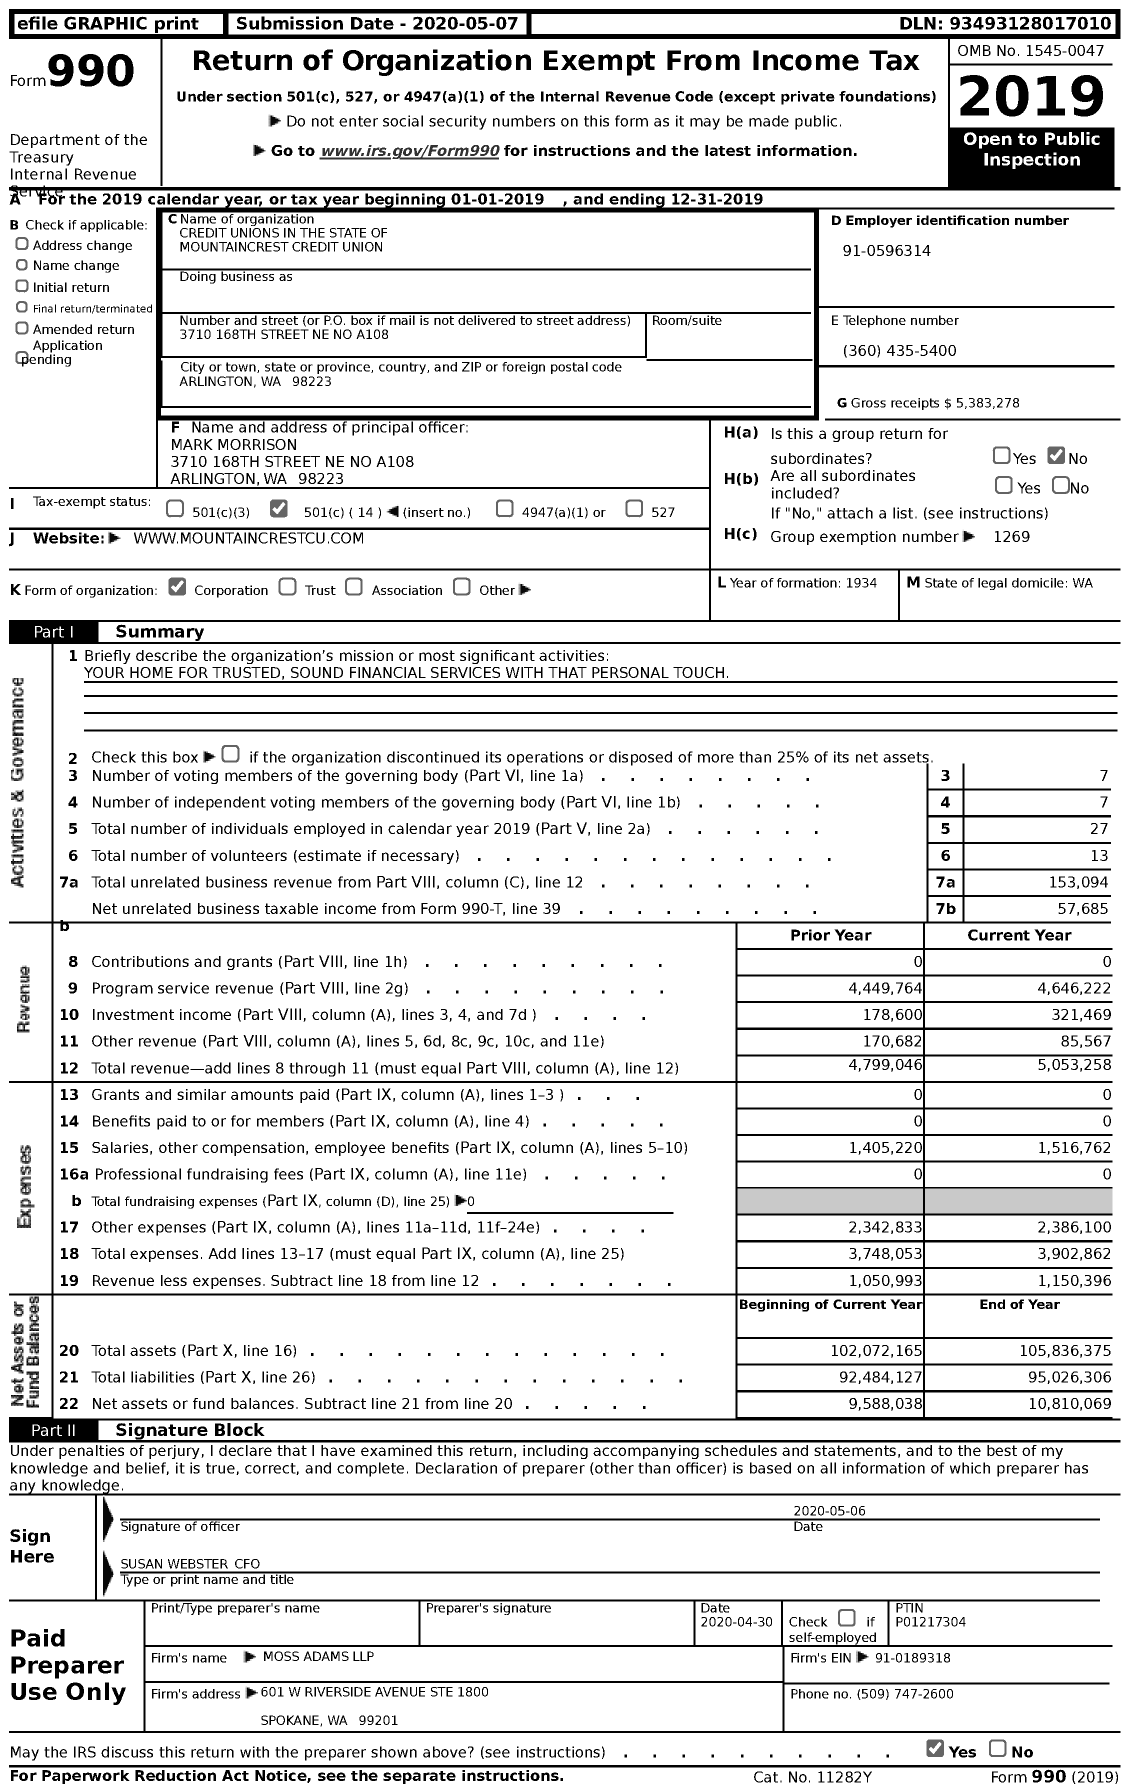 Image of first page of 2019 Form 990 for Credit Unions in the State of MountainCrest Credit Union